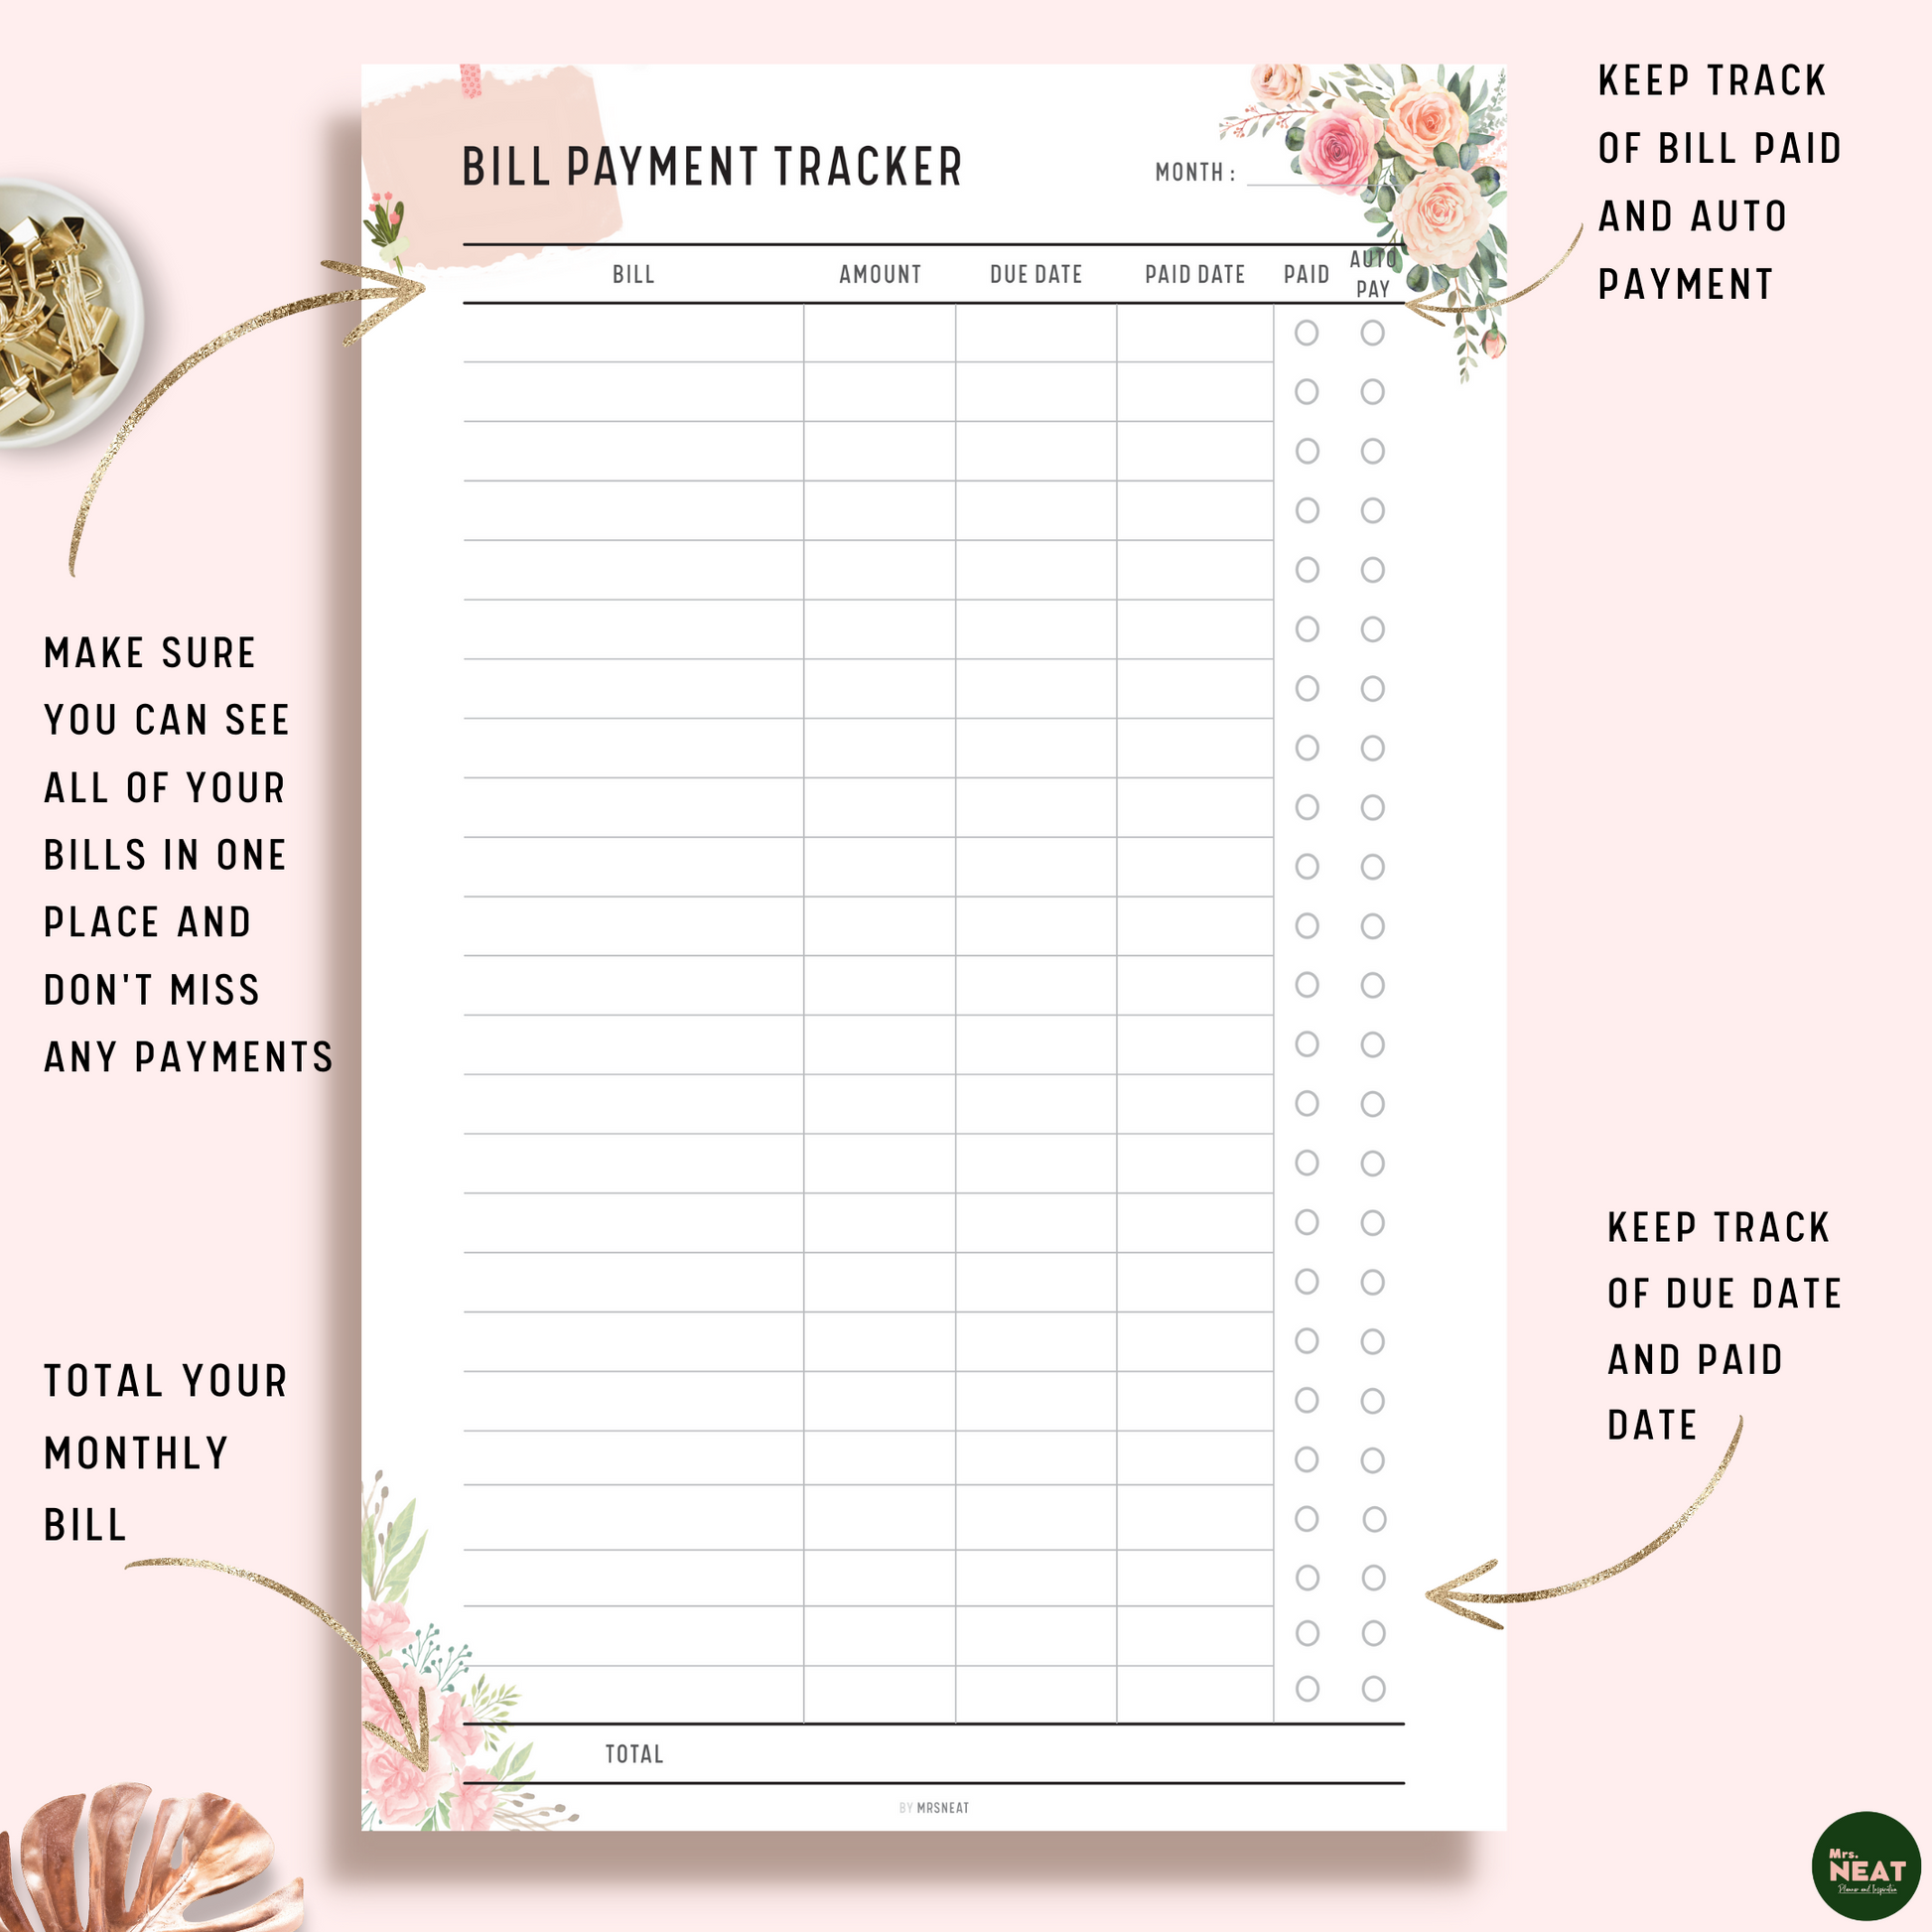 Floral Monthly Bill Payment Tracker with room for bills, amount, date and payment options